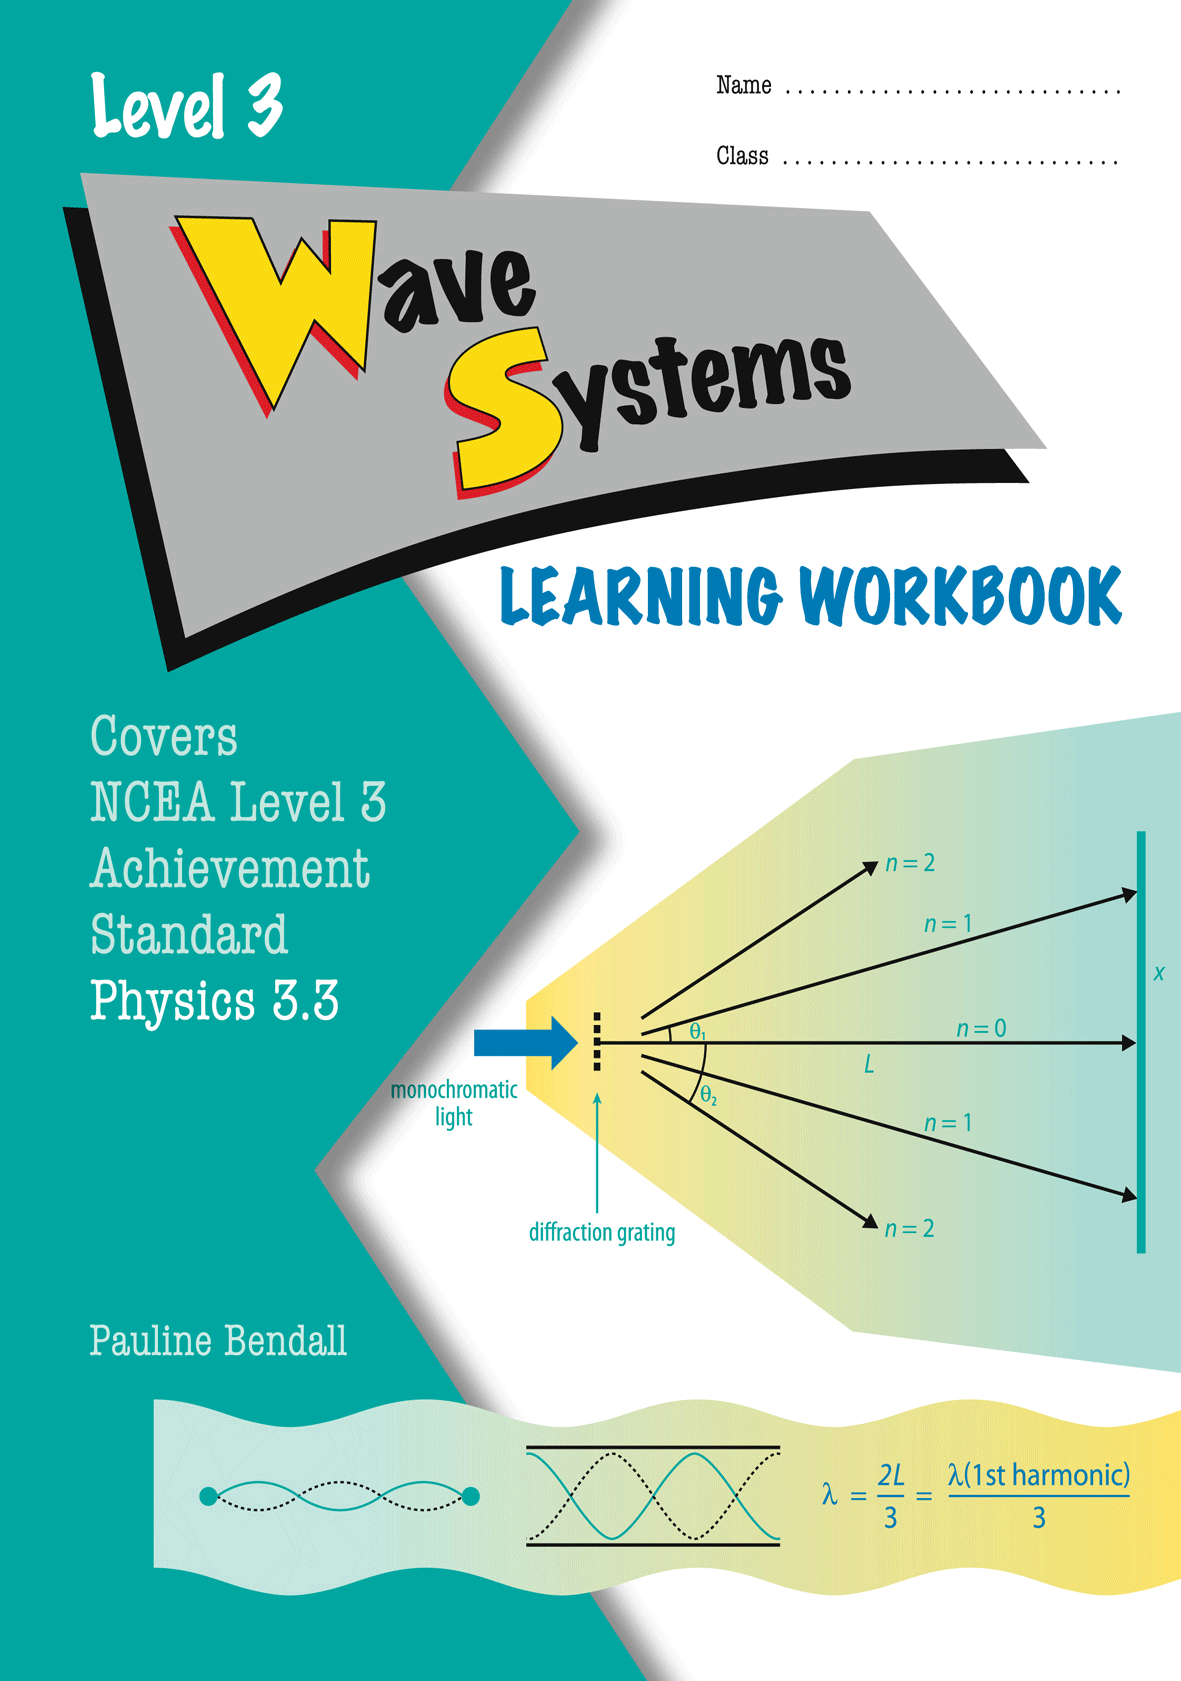 Level 3 Wave Systems 3.3 Learning Workbook